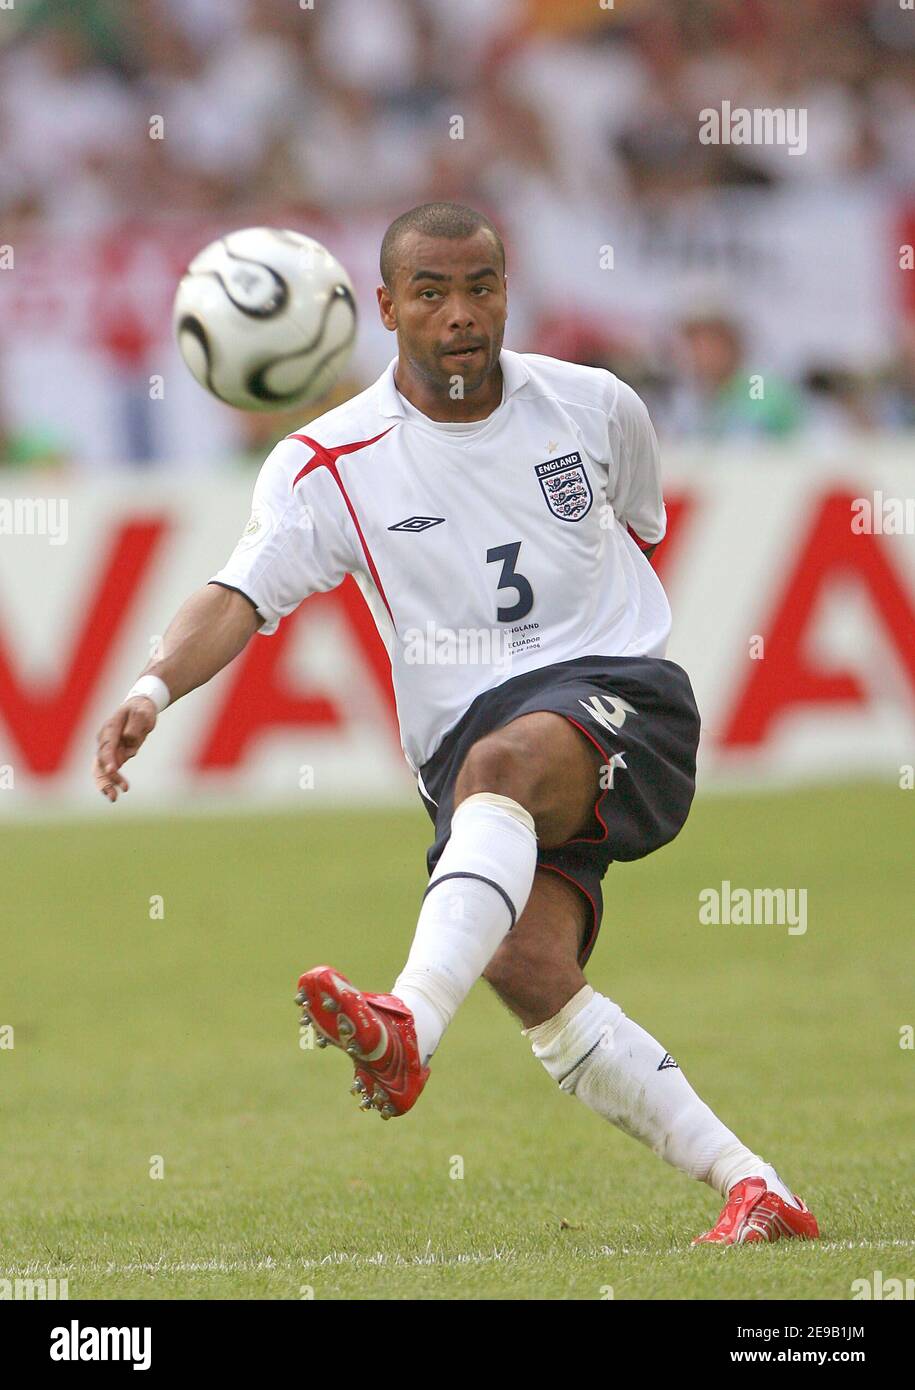 England's Ashley Cole in action during the World Cup 2006, Second round, England vs Ecuador at the Gottlieb-Daimler-Stadion stadium in Stuttgart, Germany on June 25, 2006. England won 1-0. Photo by Gouhier-Hahn-Orban/Cameleon/ABACAPRESS.COM Stock Photo